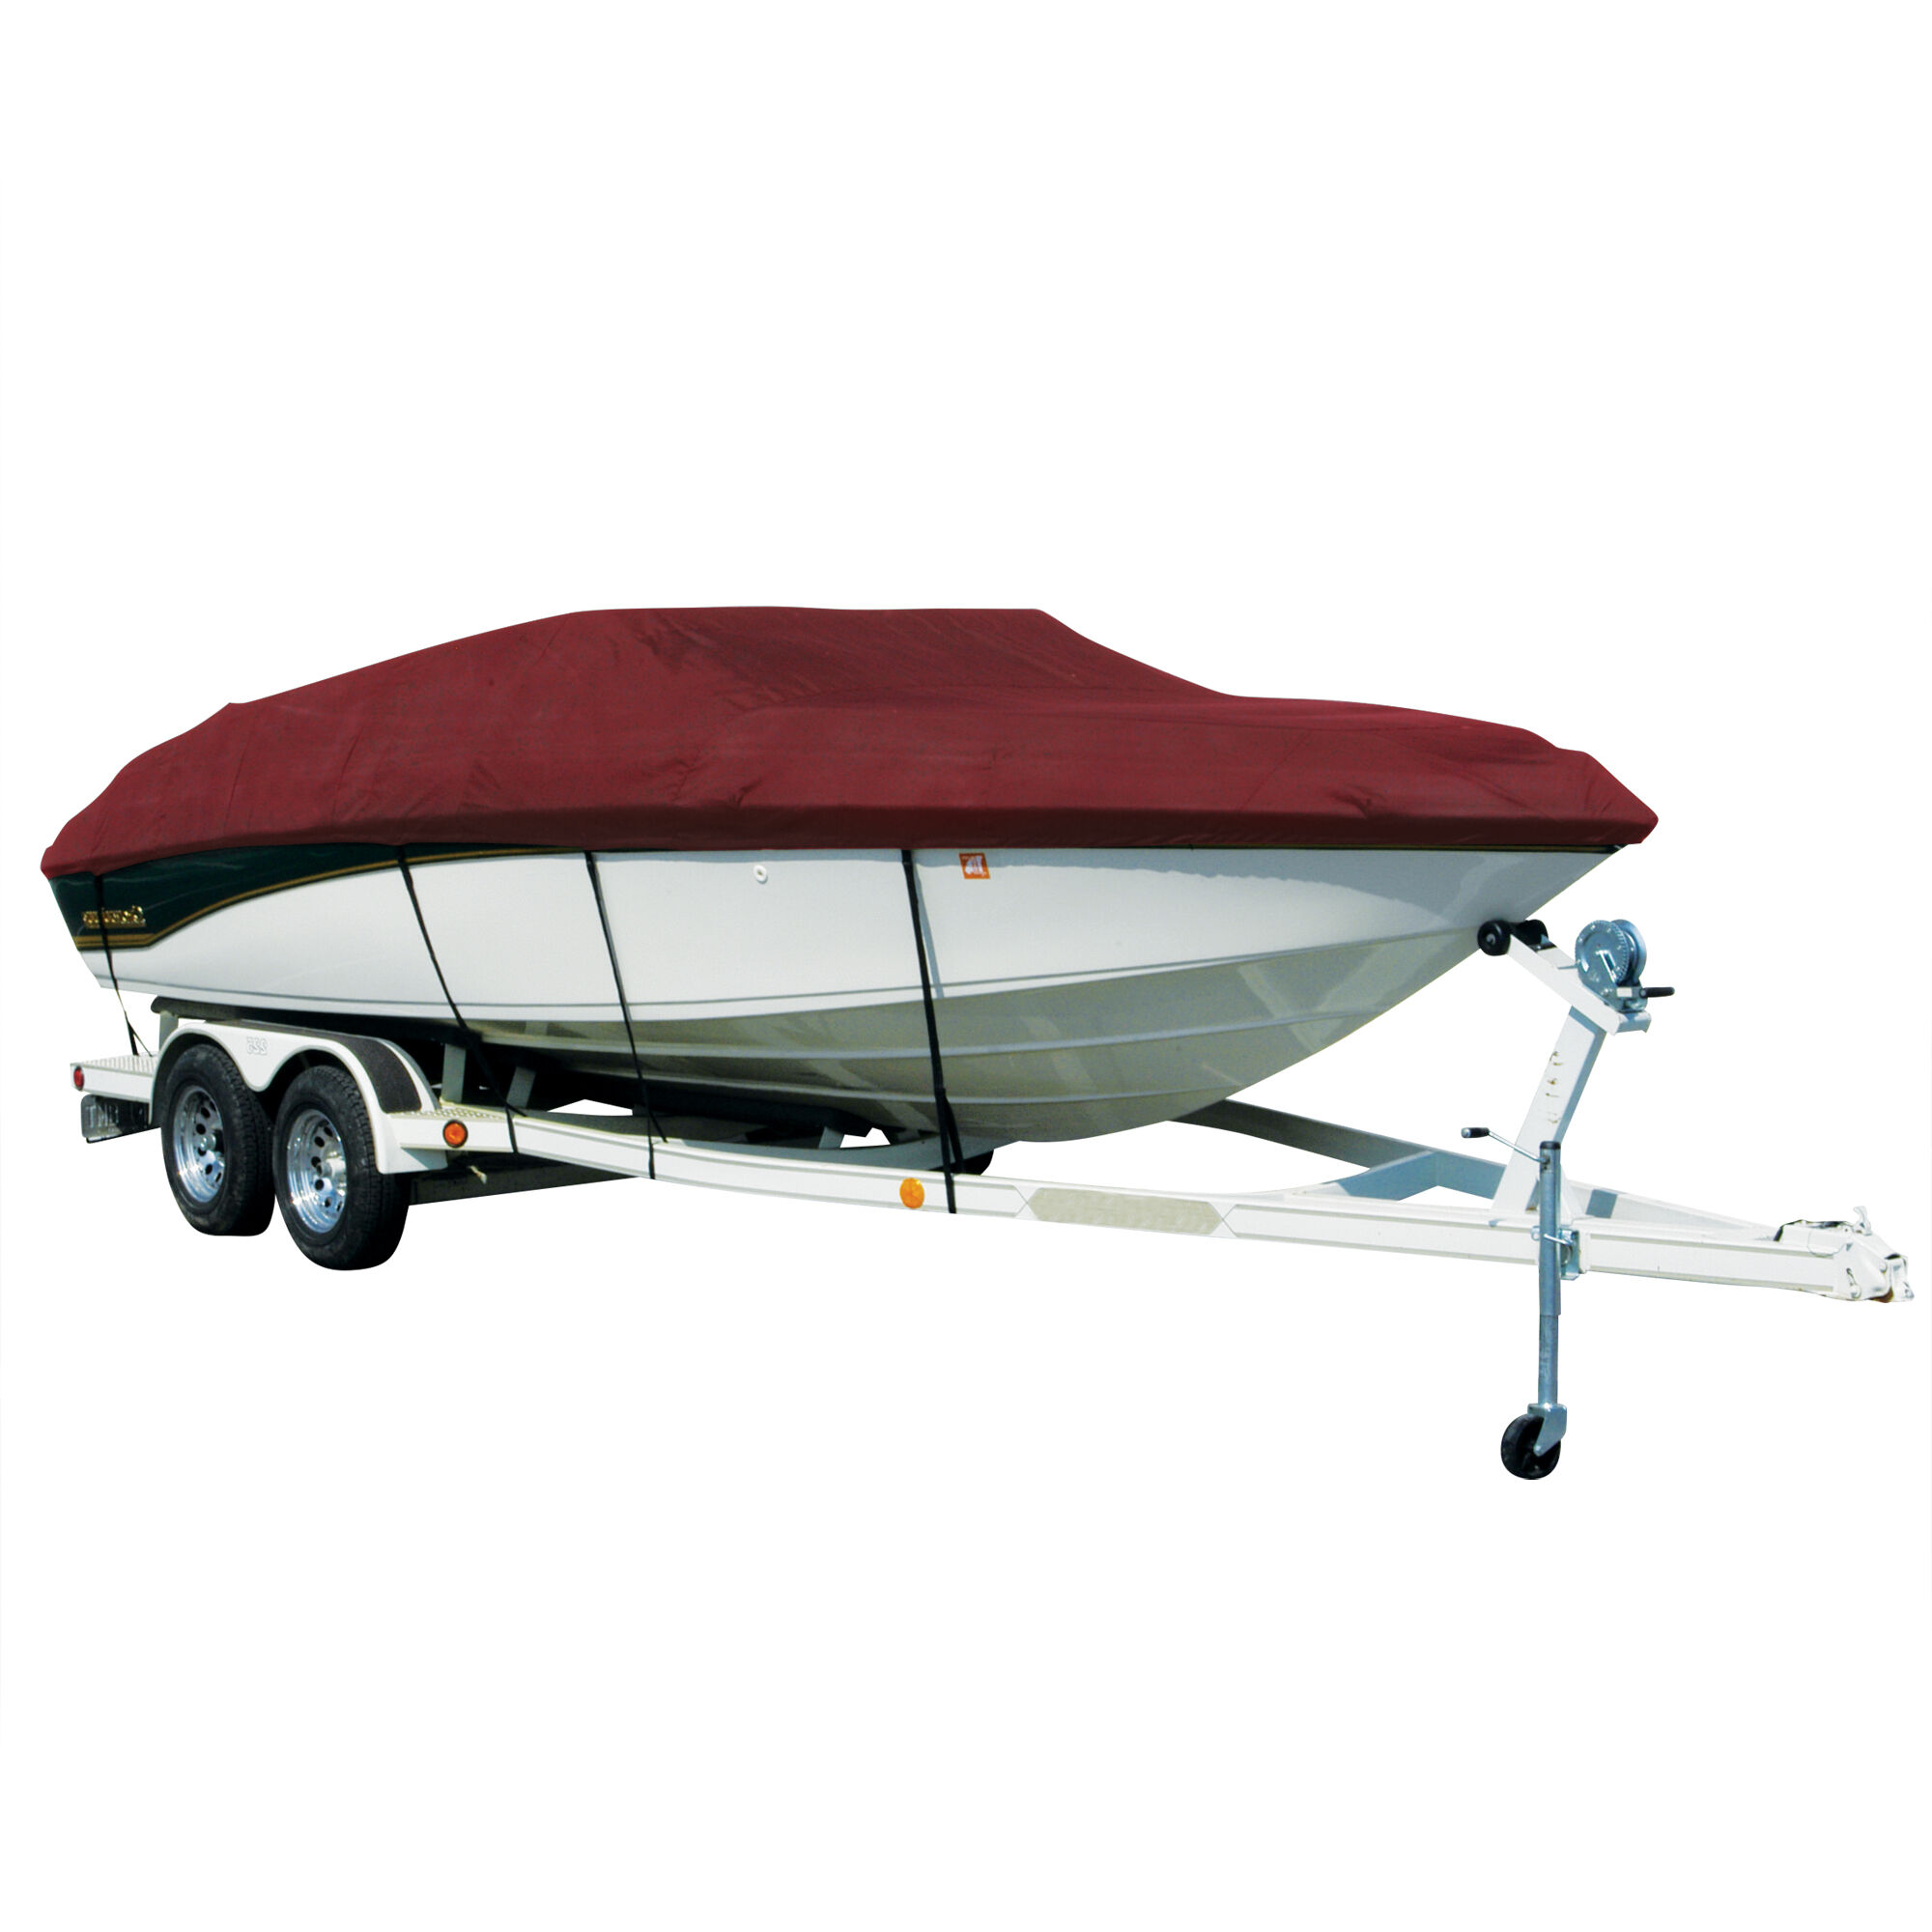 Covermate Exact Fit Sharkskin Boat Cover For VIP BAY STEALTH 2230 w/ 53 CONSOLE in Burgundy